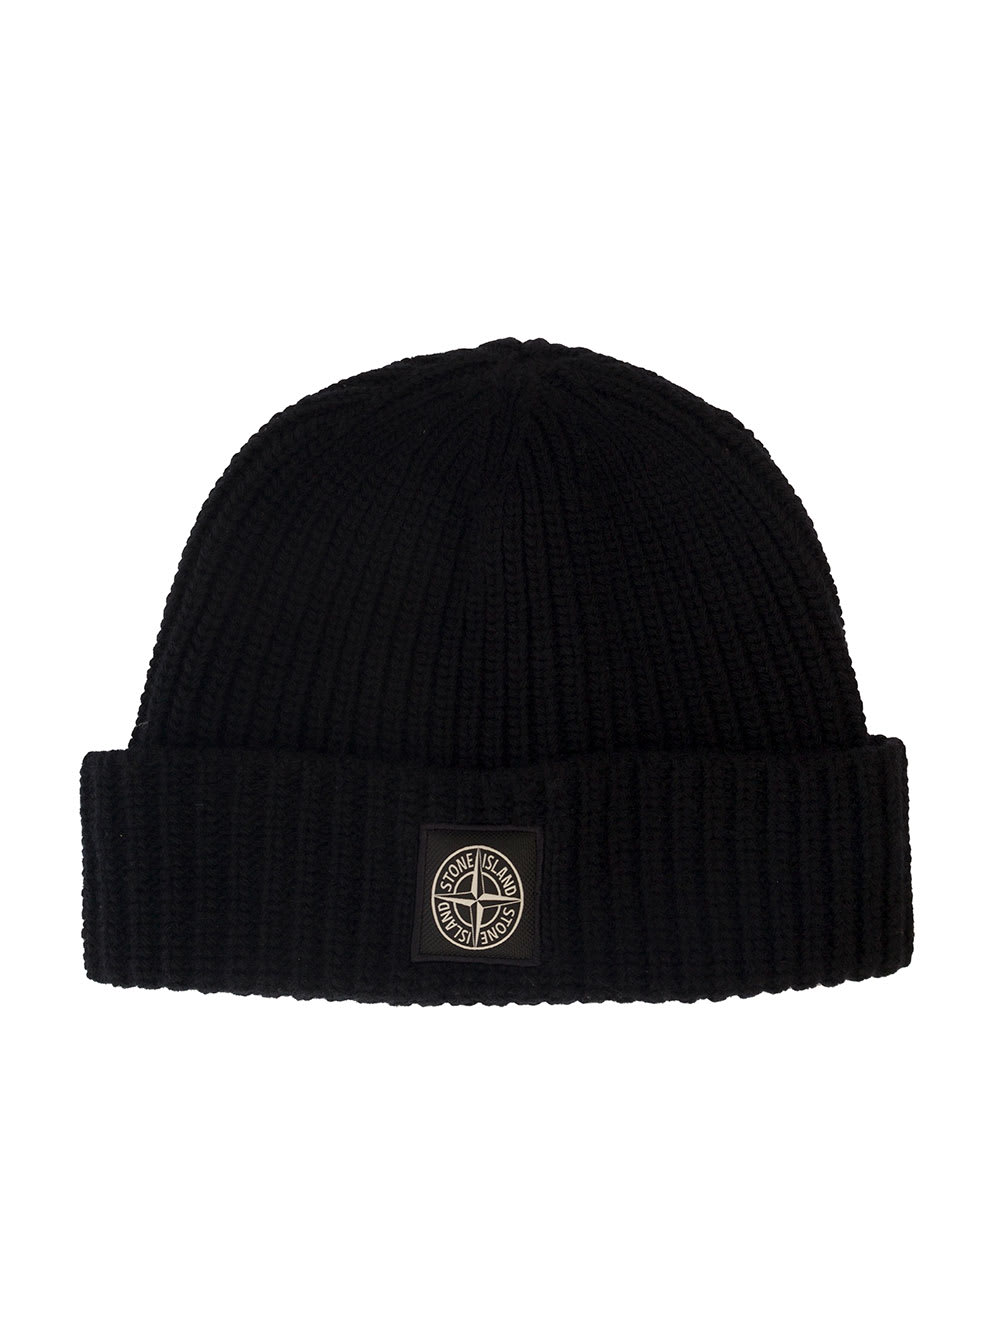 STONE ISLAND BLACK KNITTED BEANIE WITH LOGO PATCH AT THE FRONT IN WOOL MAN